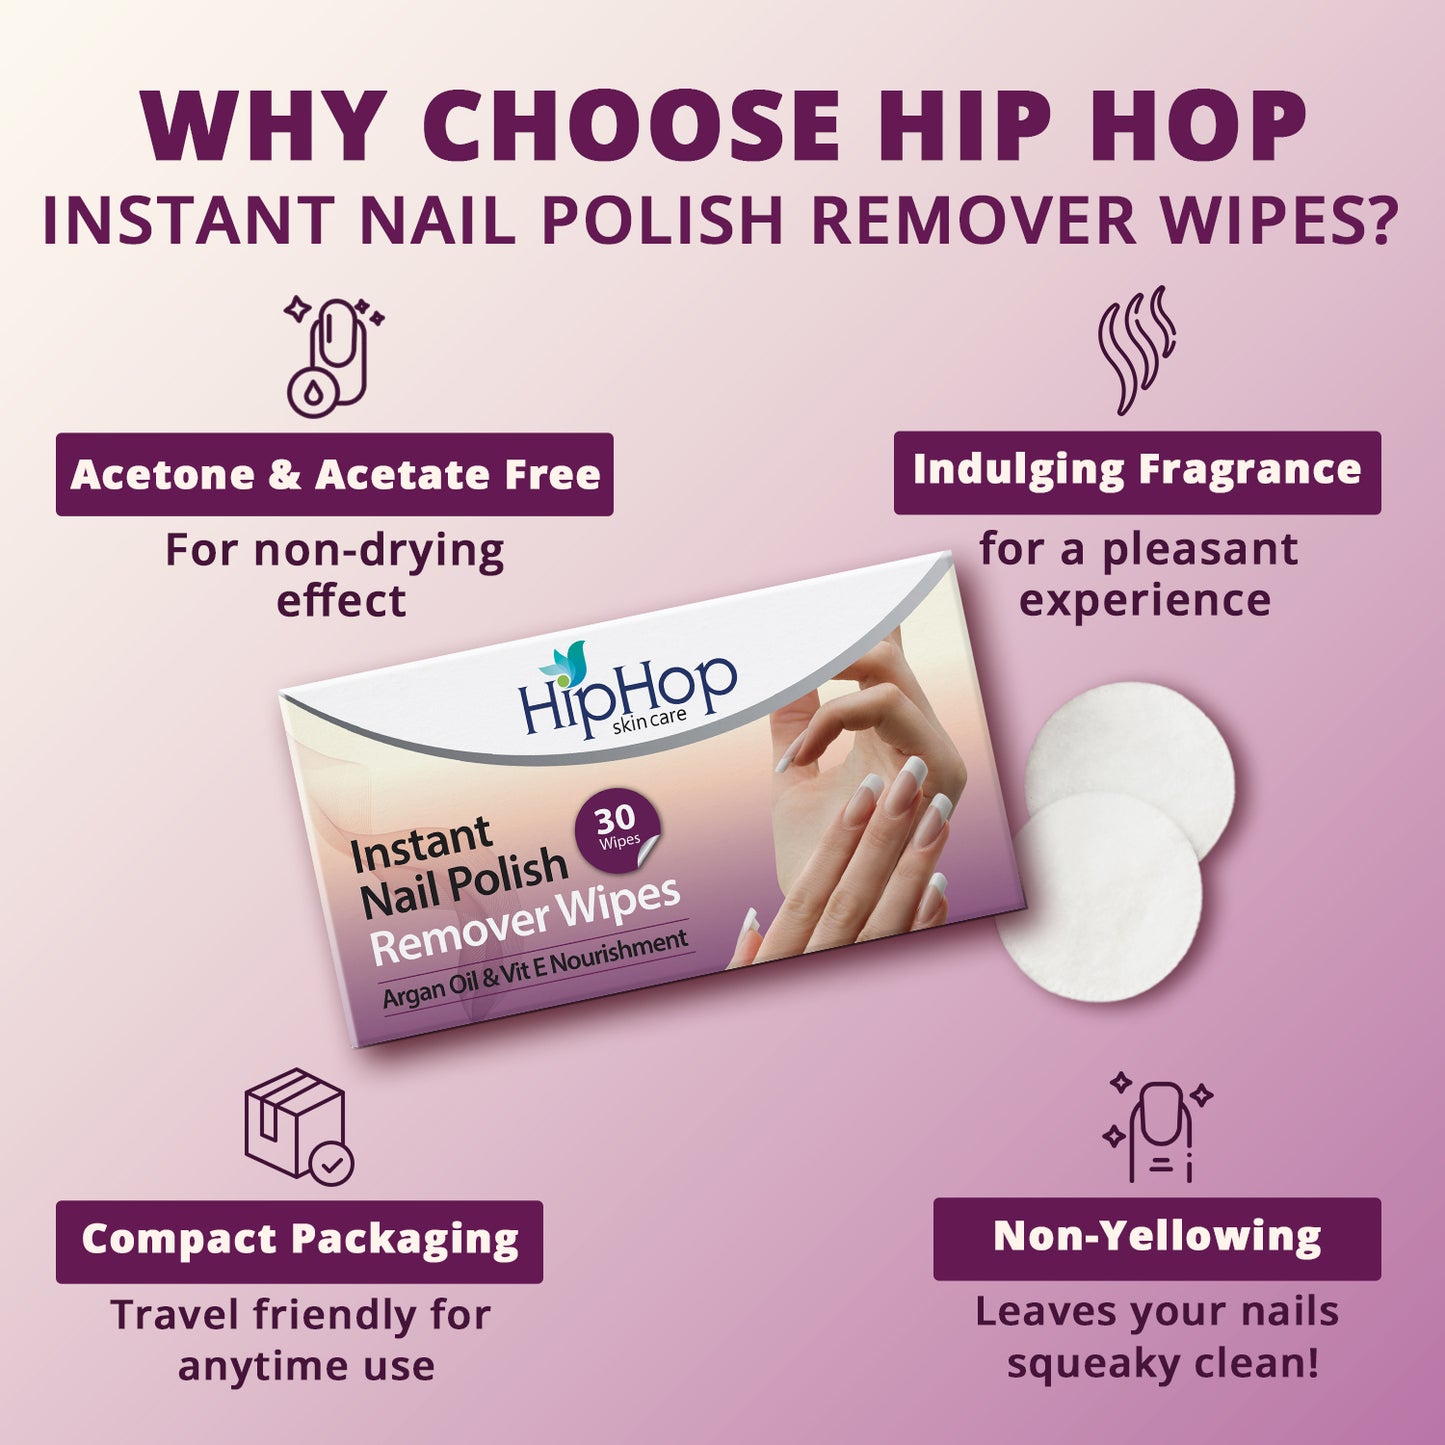 HipHop Body Wax Strips (Aloe Vera, 8 Strips) + Instant Nail Polish Remover Wipes (Argon Oil, 30 Wipes)